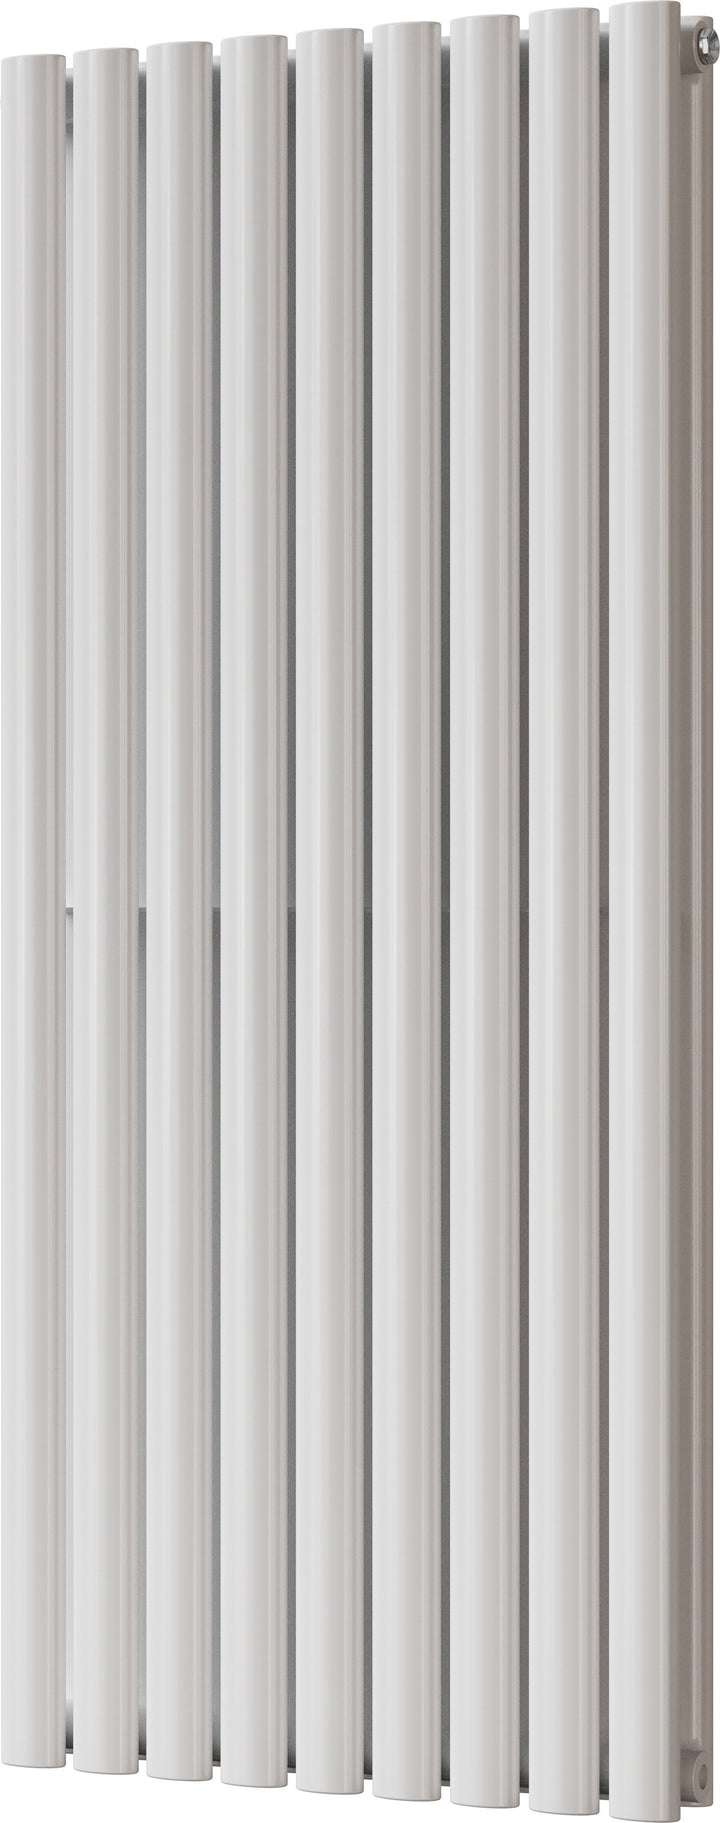 Omeara - White Vertical Radiator H1200mm x W522mm Double Panel